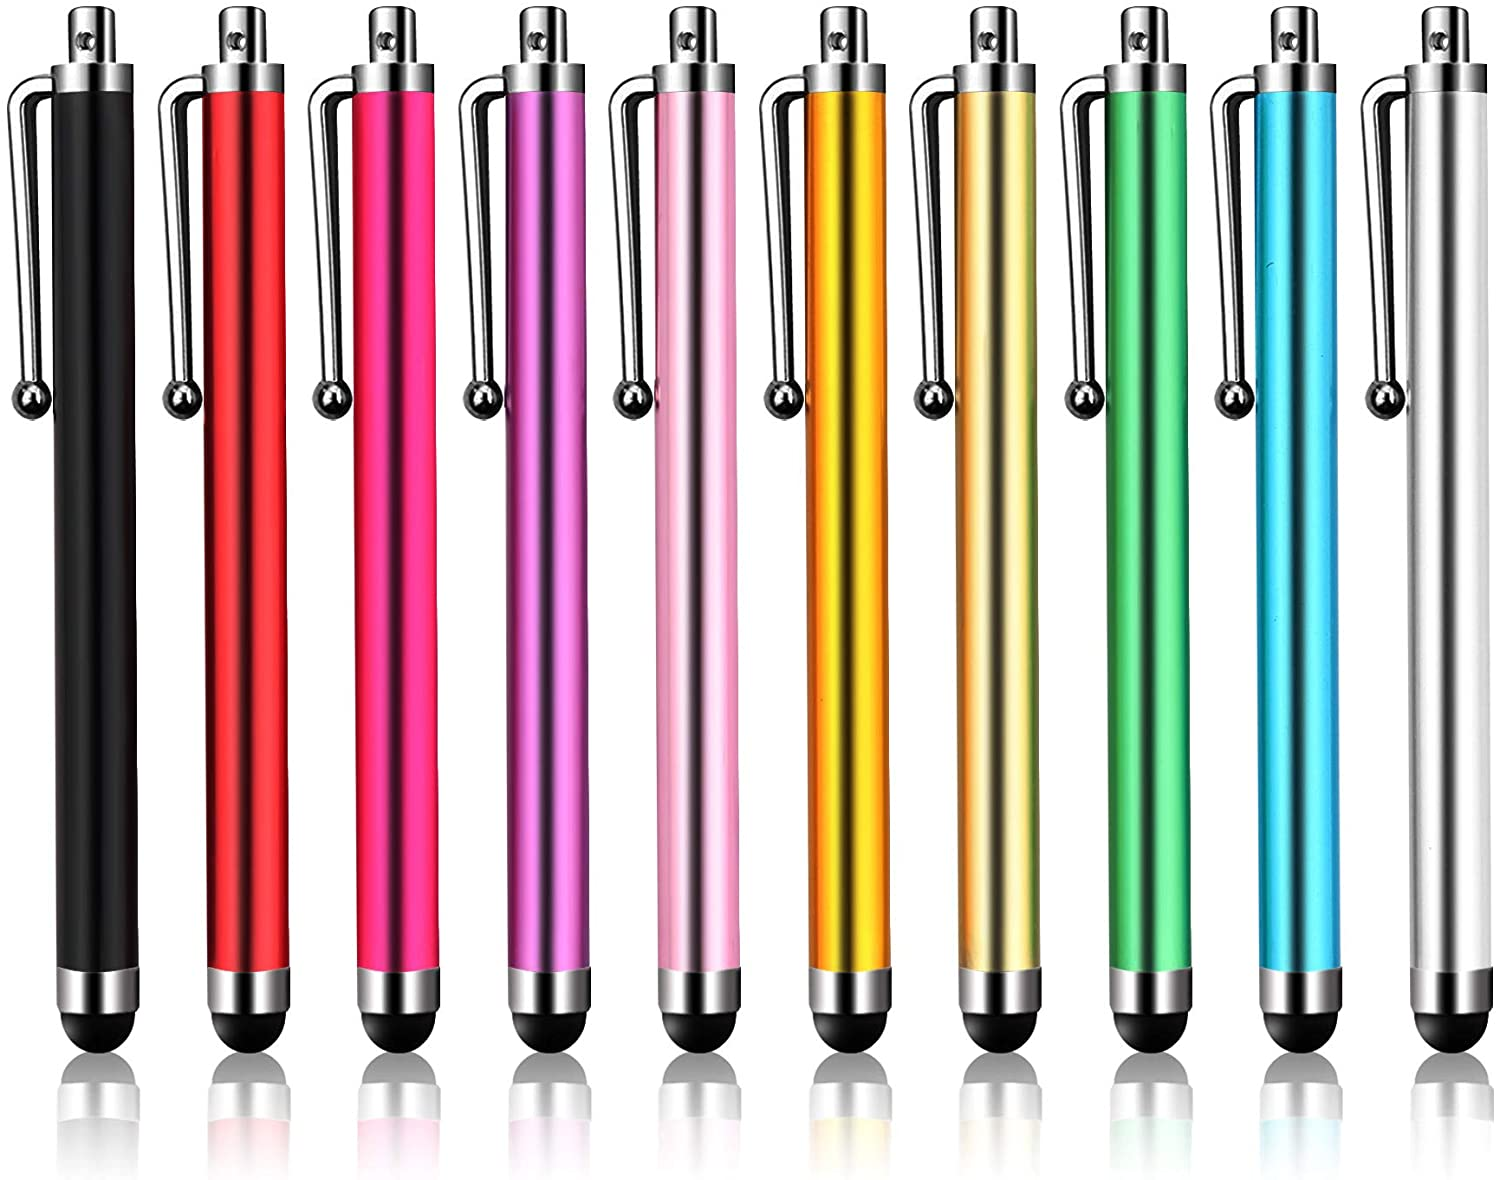 Stylus Pens for Touch Screens, Stylus Pen for Ipad, Tablet Stylus Pencil, High Sensitivity & Fine Point Universal for Android/ Phone/ Ipad Pro/ Air/ Android/ and All Devices, 10 Pack